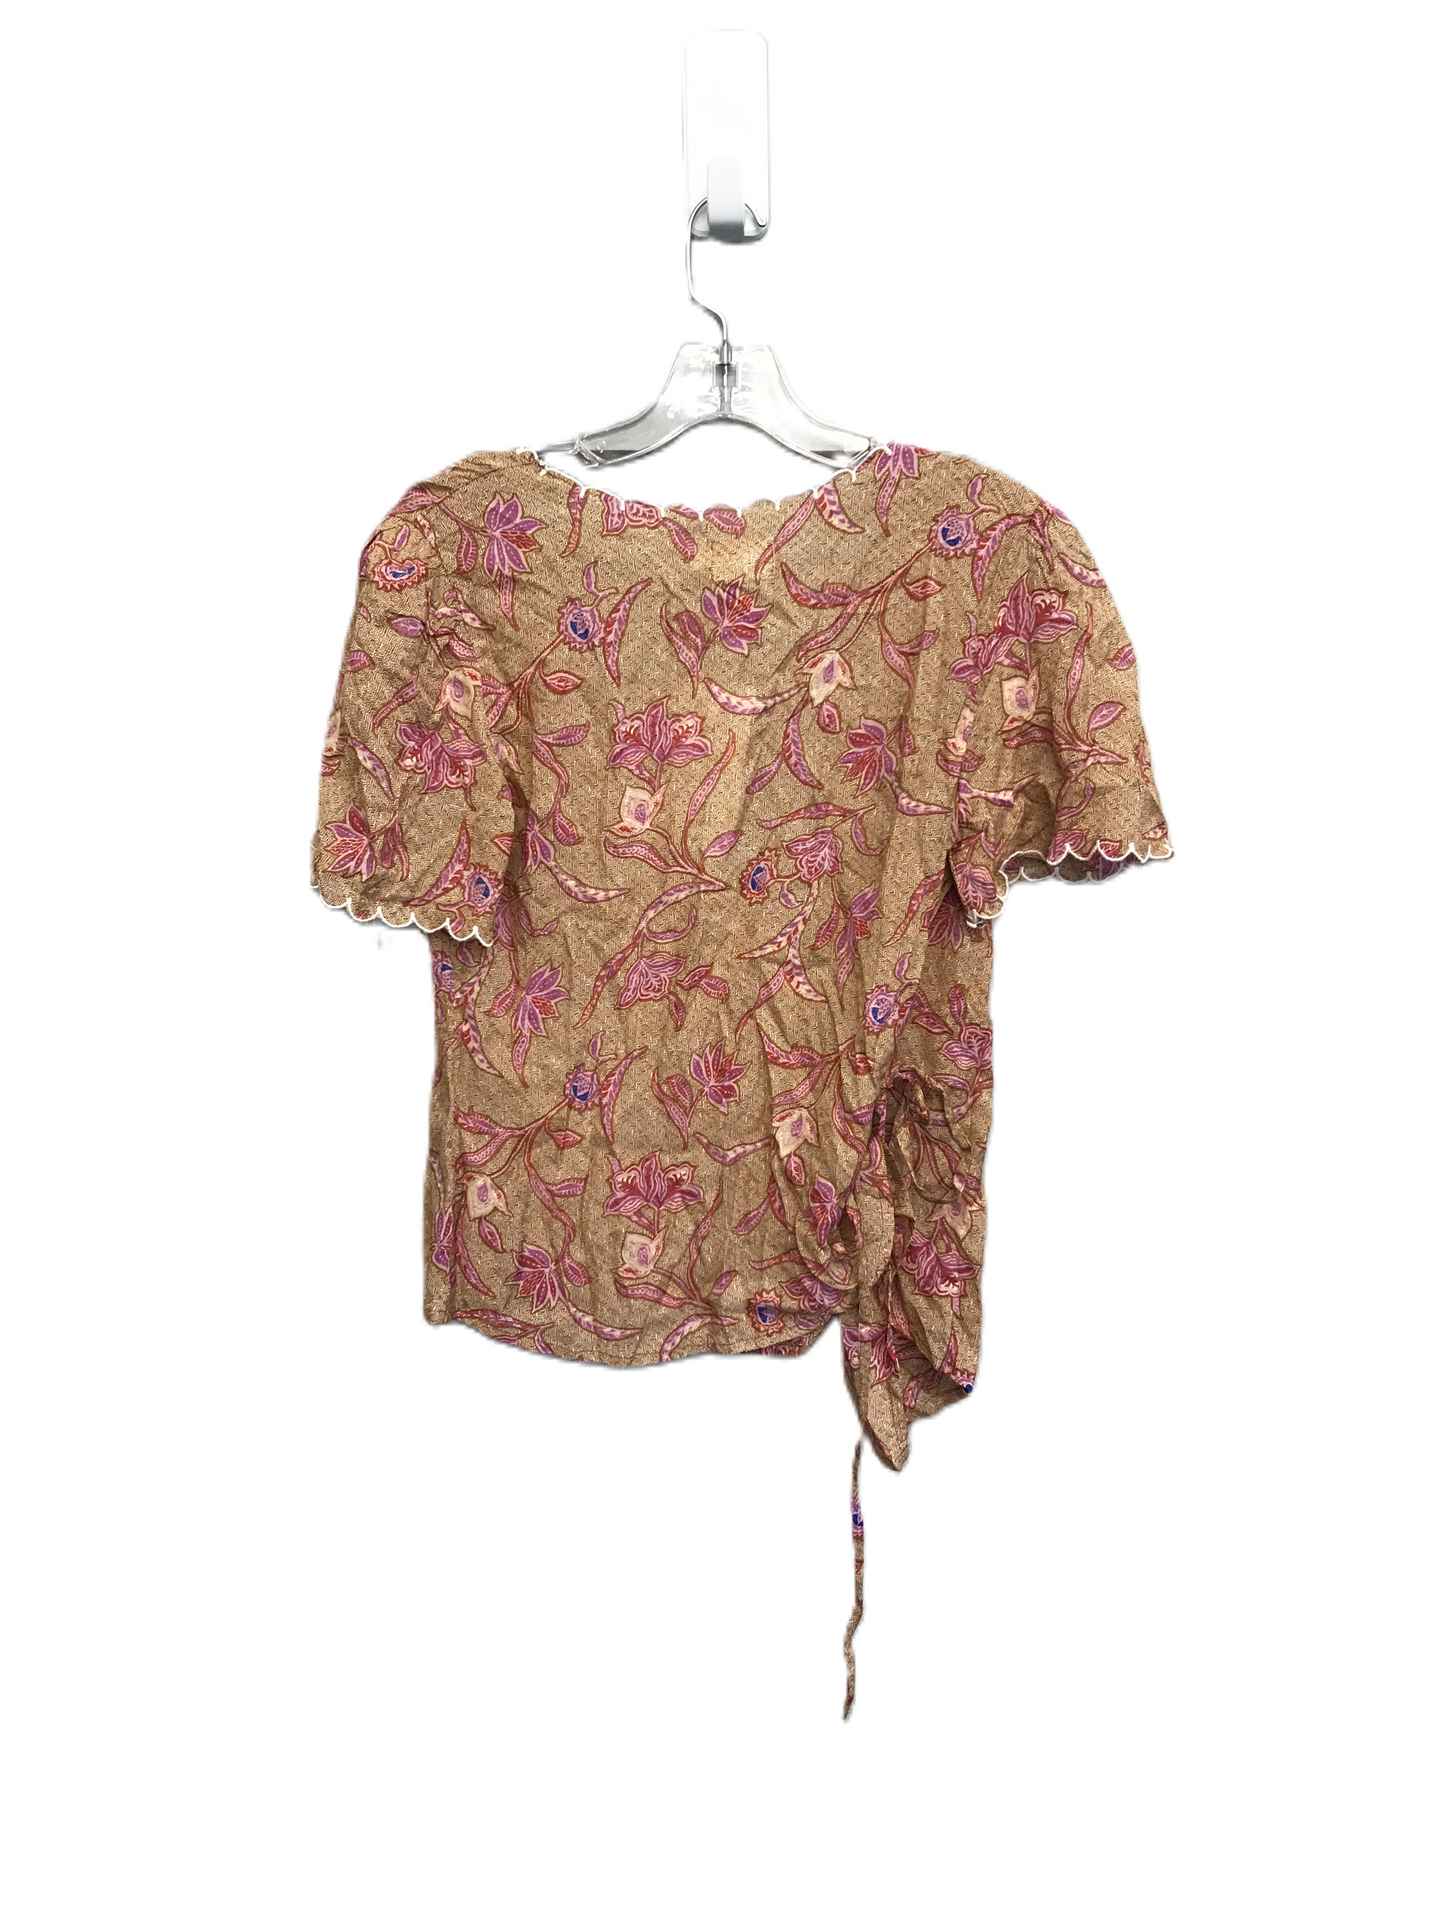 Brown & Red Top Short Sleeve By Atelier Reve Size: S